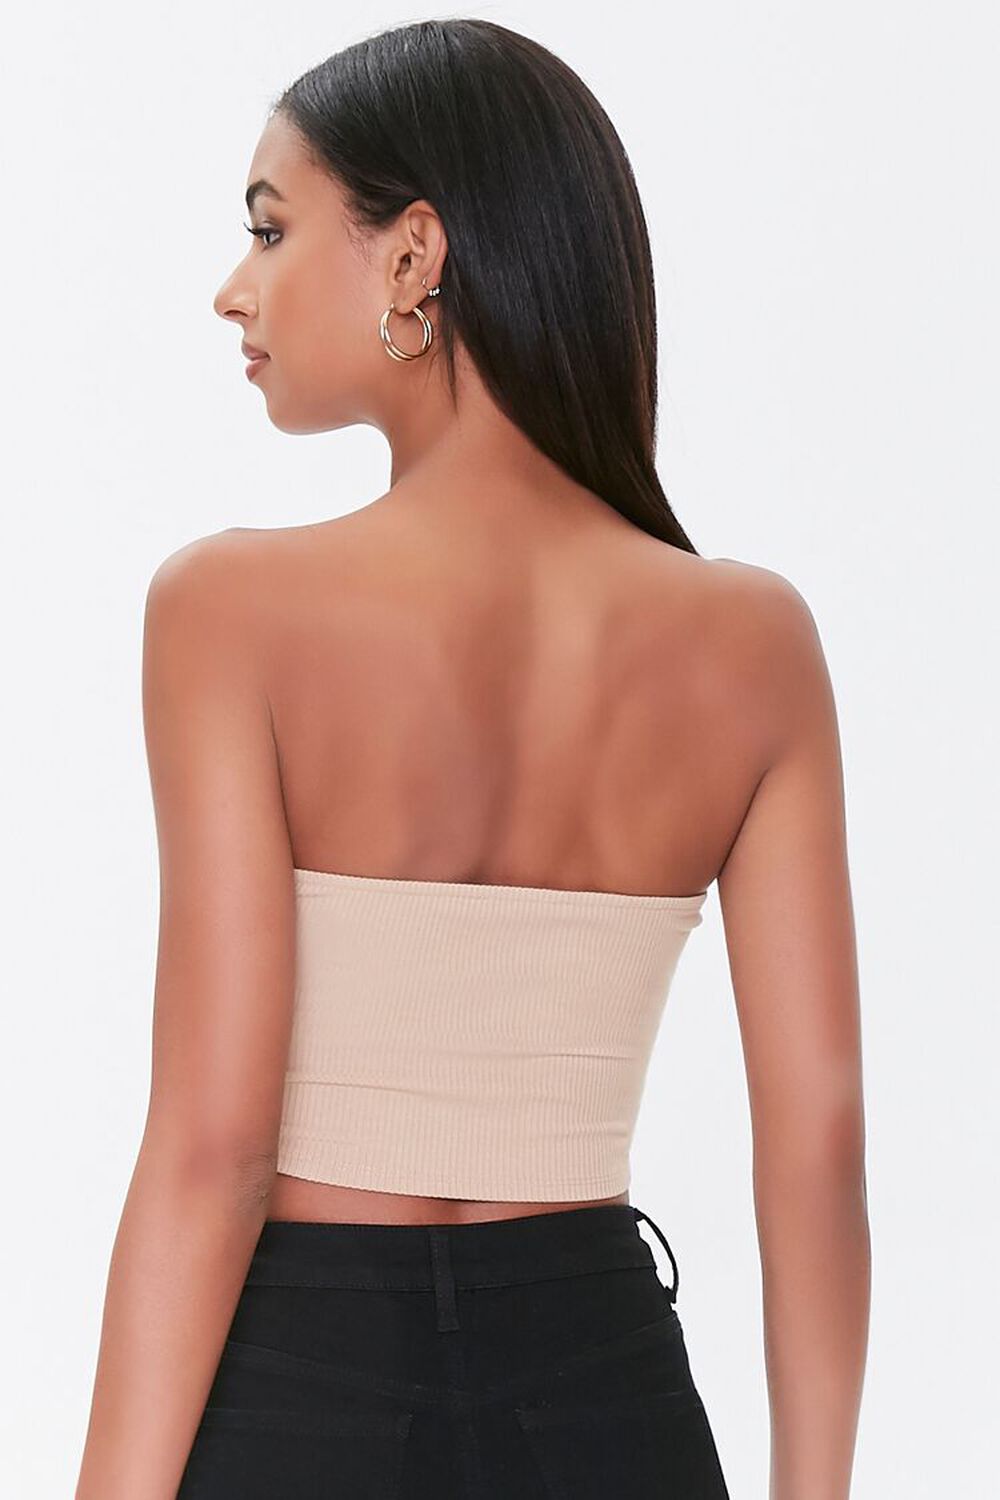 TAUPE Ruched Drawstring Tube Top, image 3